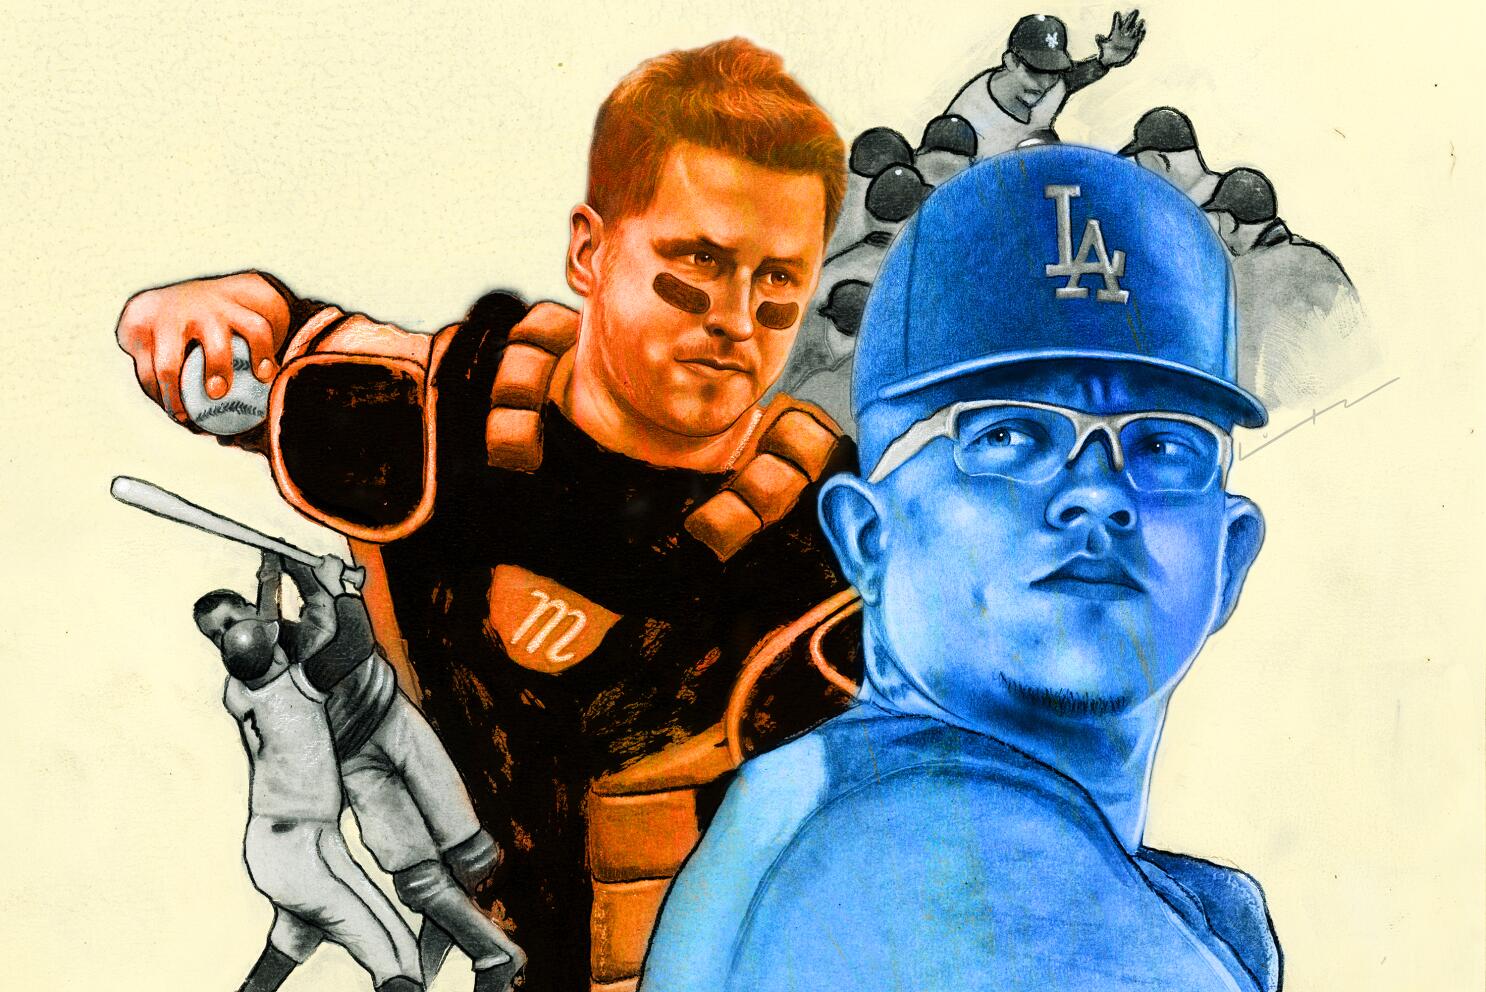 The Yankees are basically the Dodgers, and Giants fans shouldn't